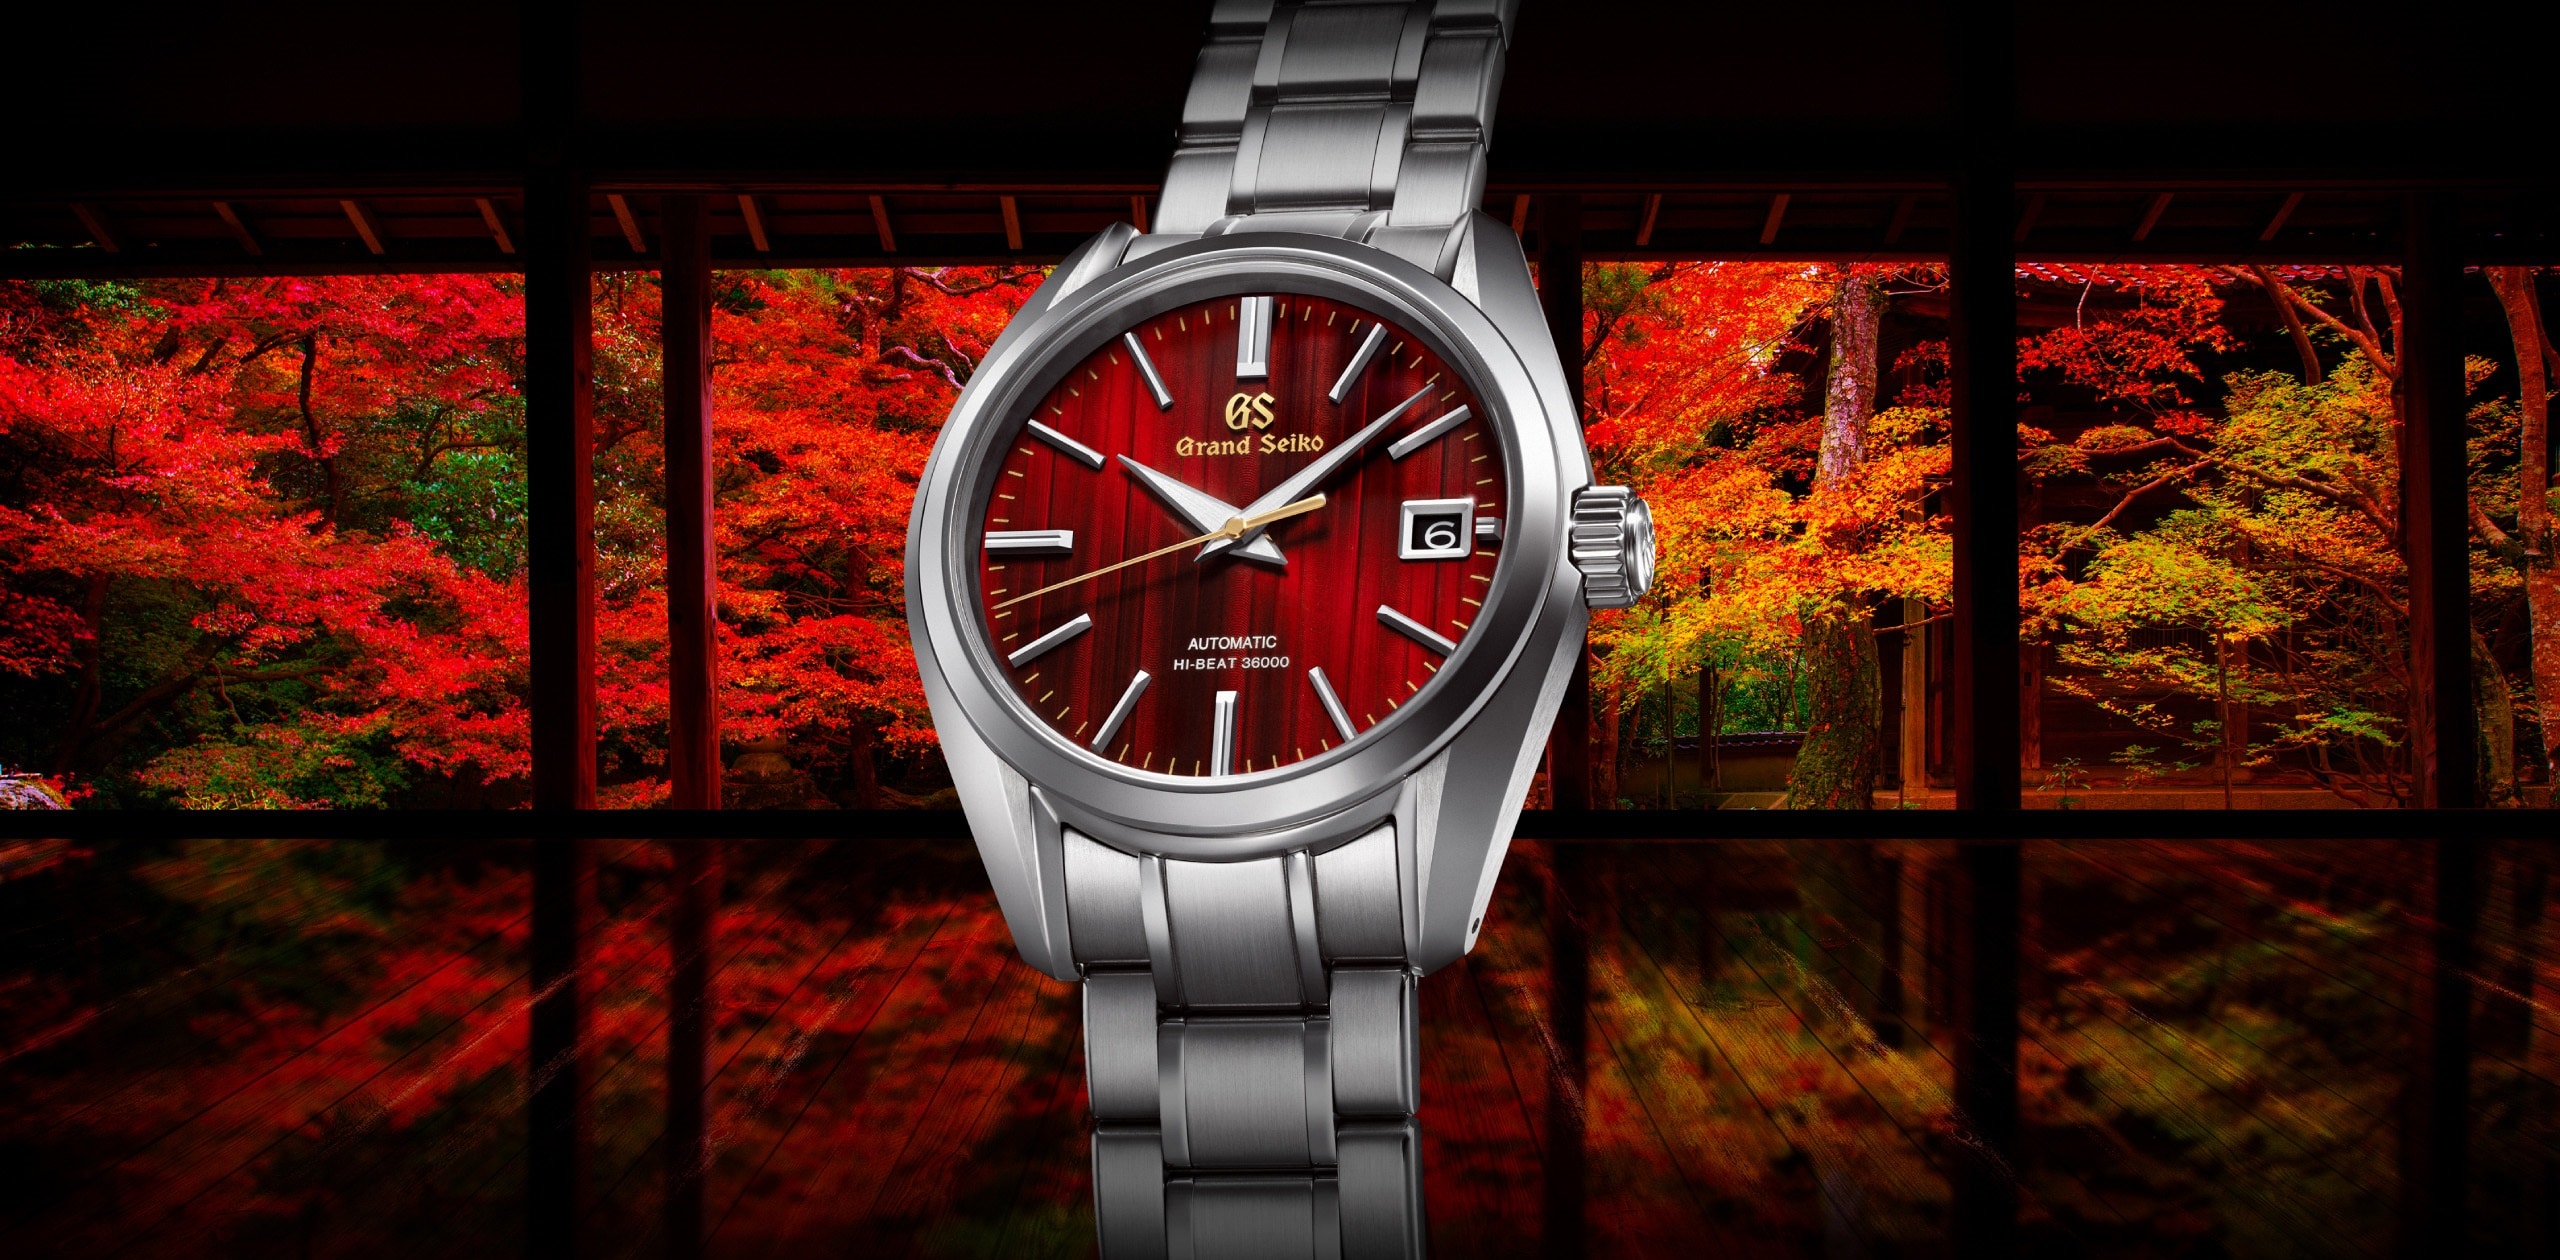 Introducing The Grand Seiko Heritage SBGH269 “Autumn” Limited Edition Watch